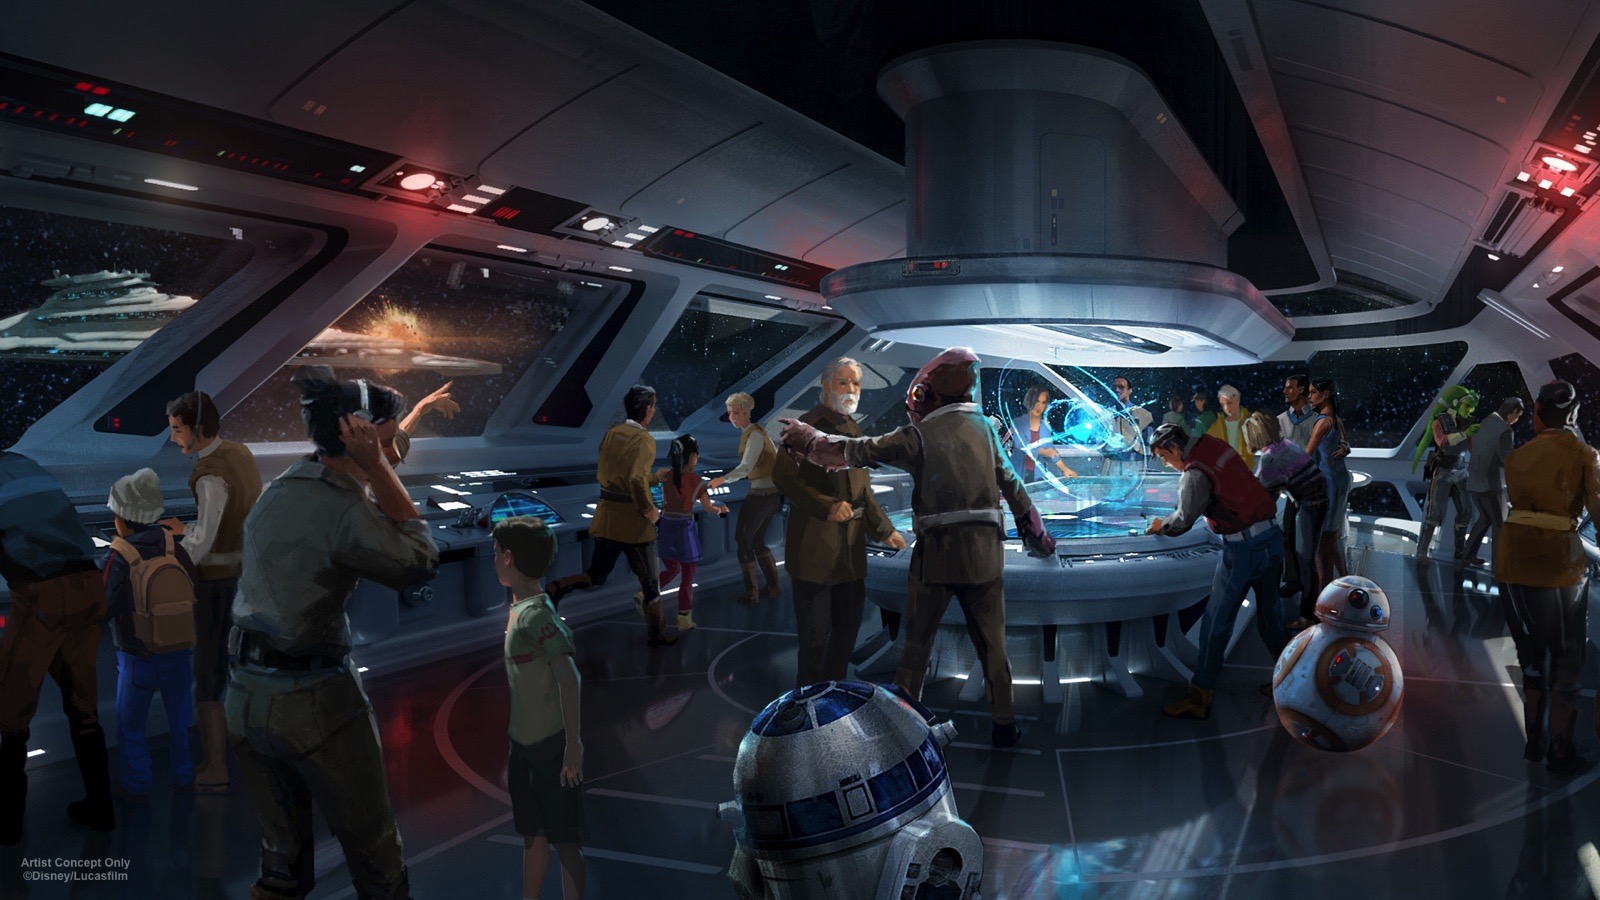 Amusement parks based on Star Wars, will open its doors in 2019